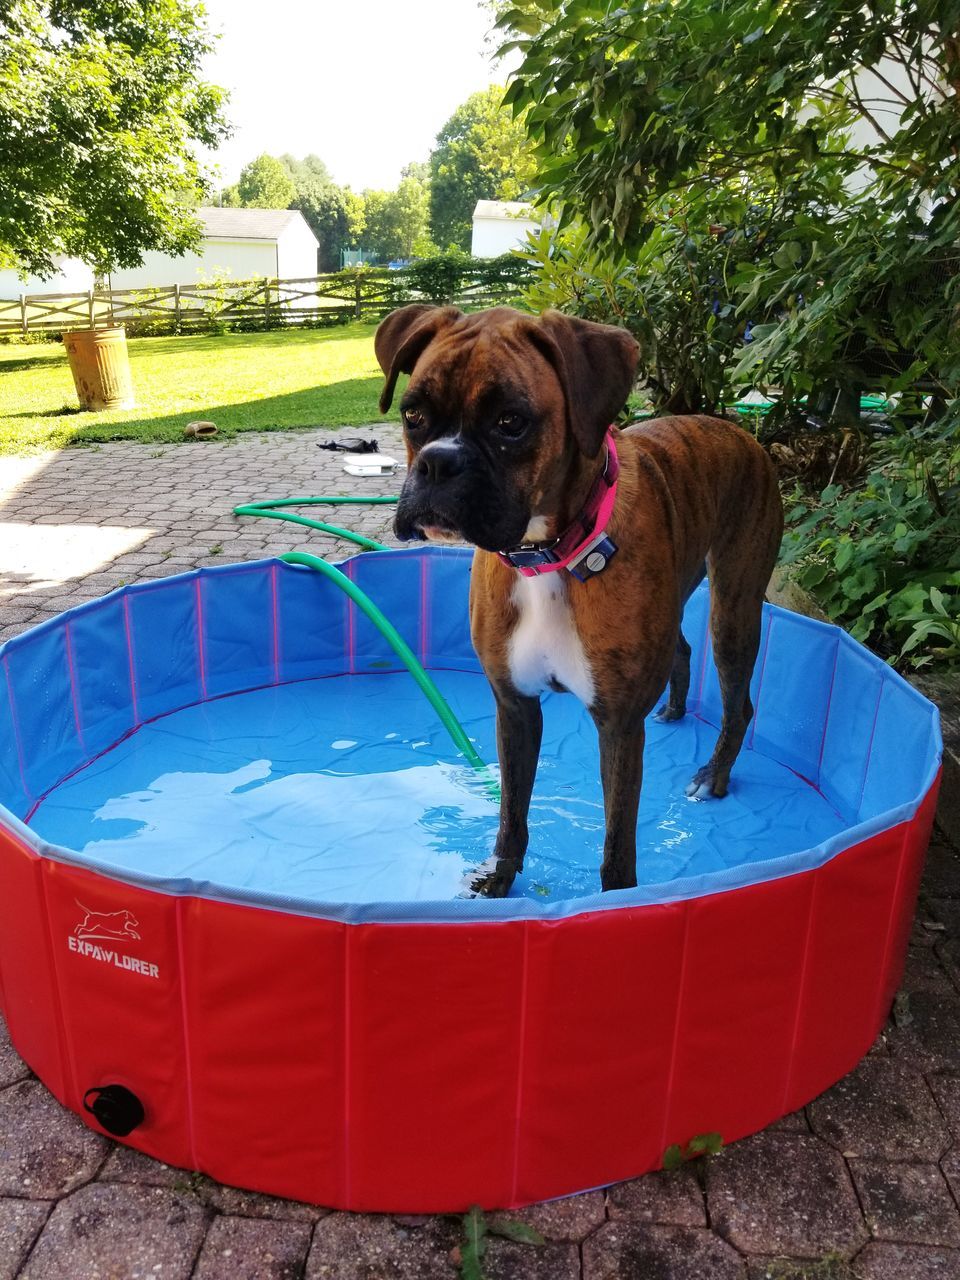 pets, one animal, mammal, domestic animals, animal themes, domestic, animal, vertebrate, canine, dog, nature, day, water, plant, container, no people, pool, swimming pool, bucket